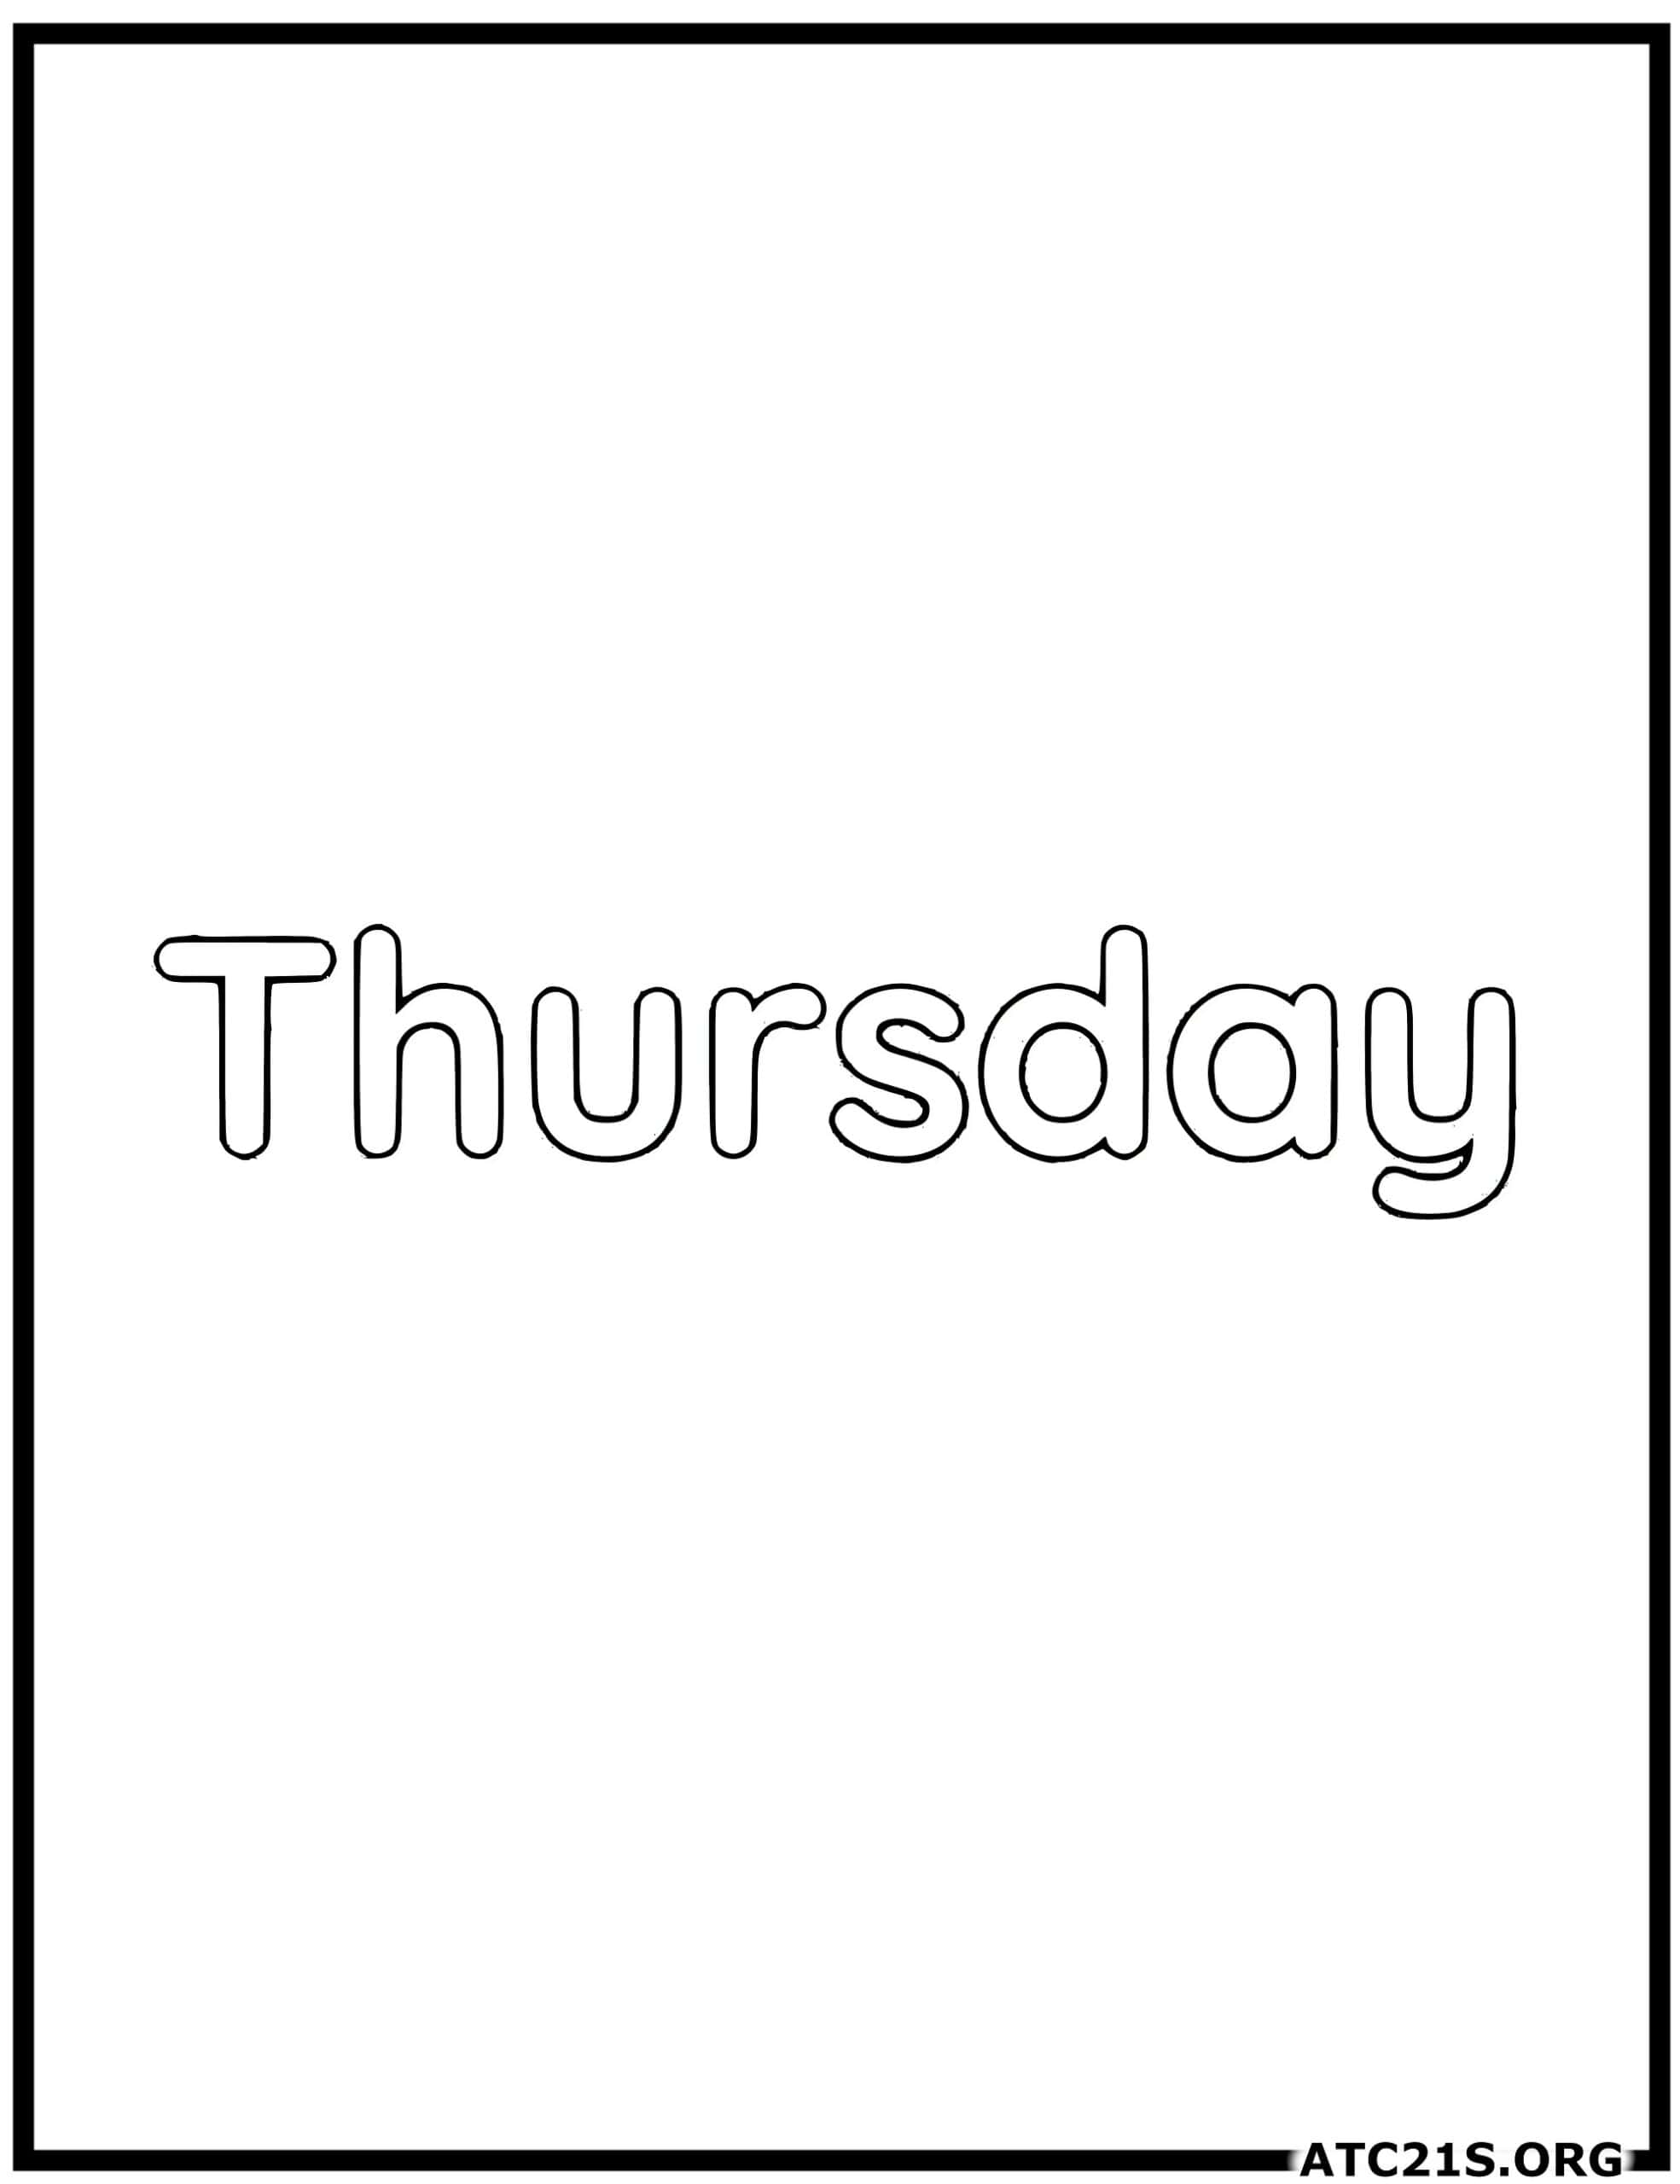 thursday_coloring_page